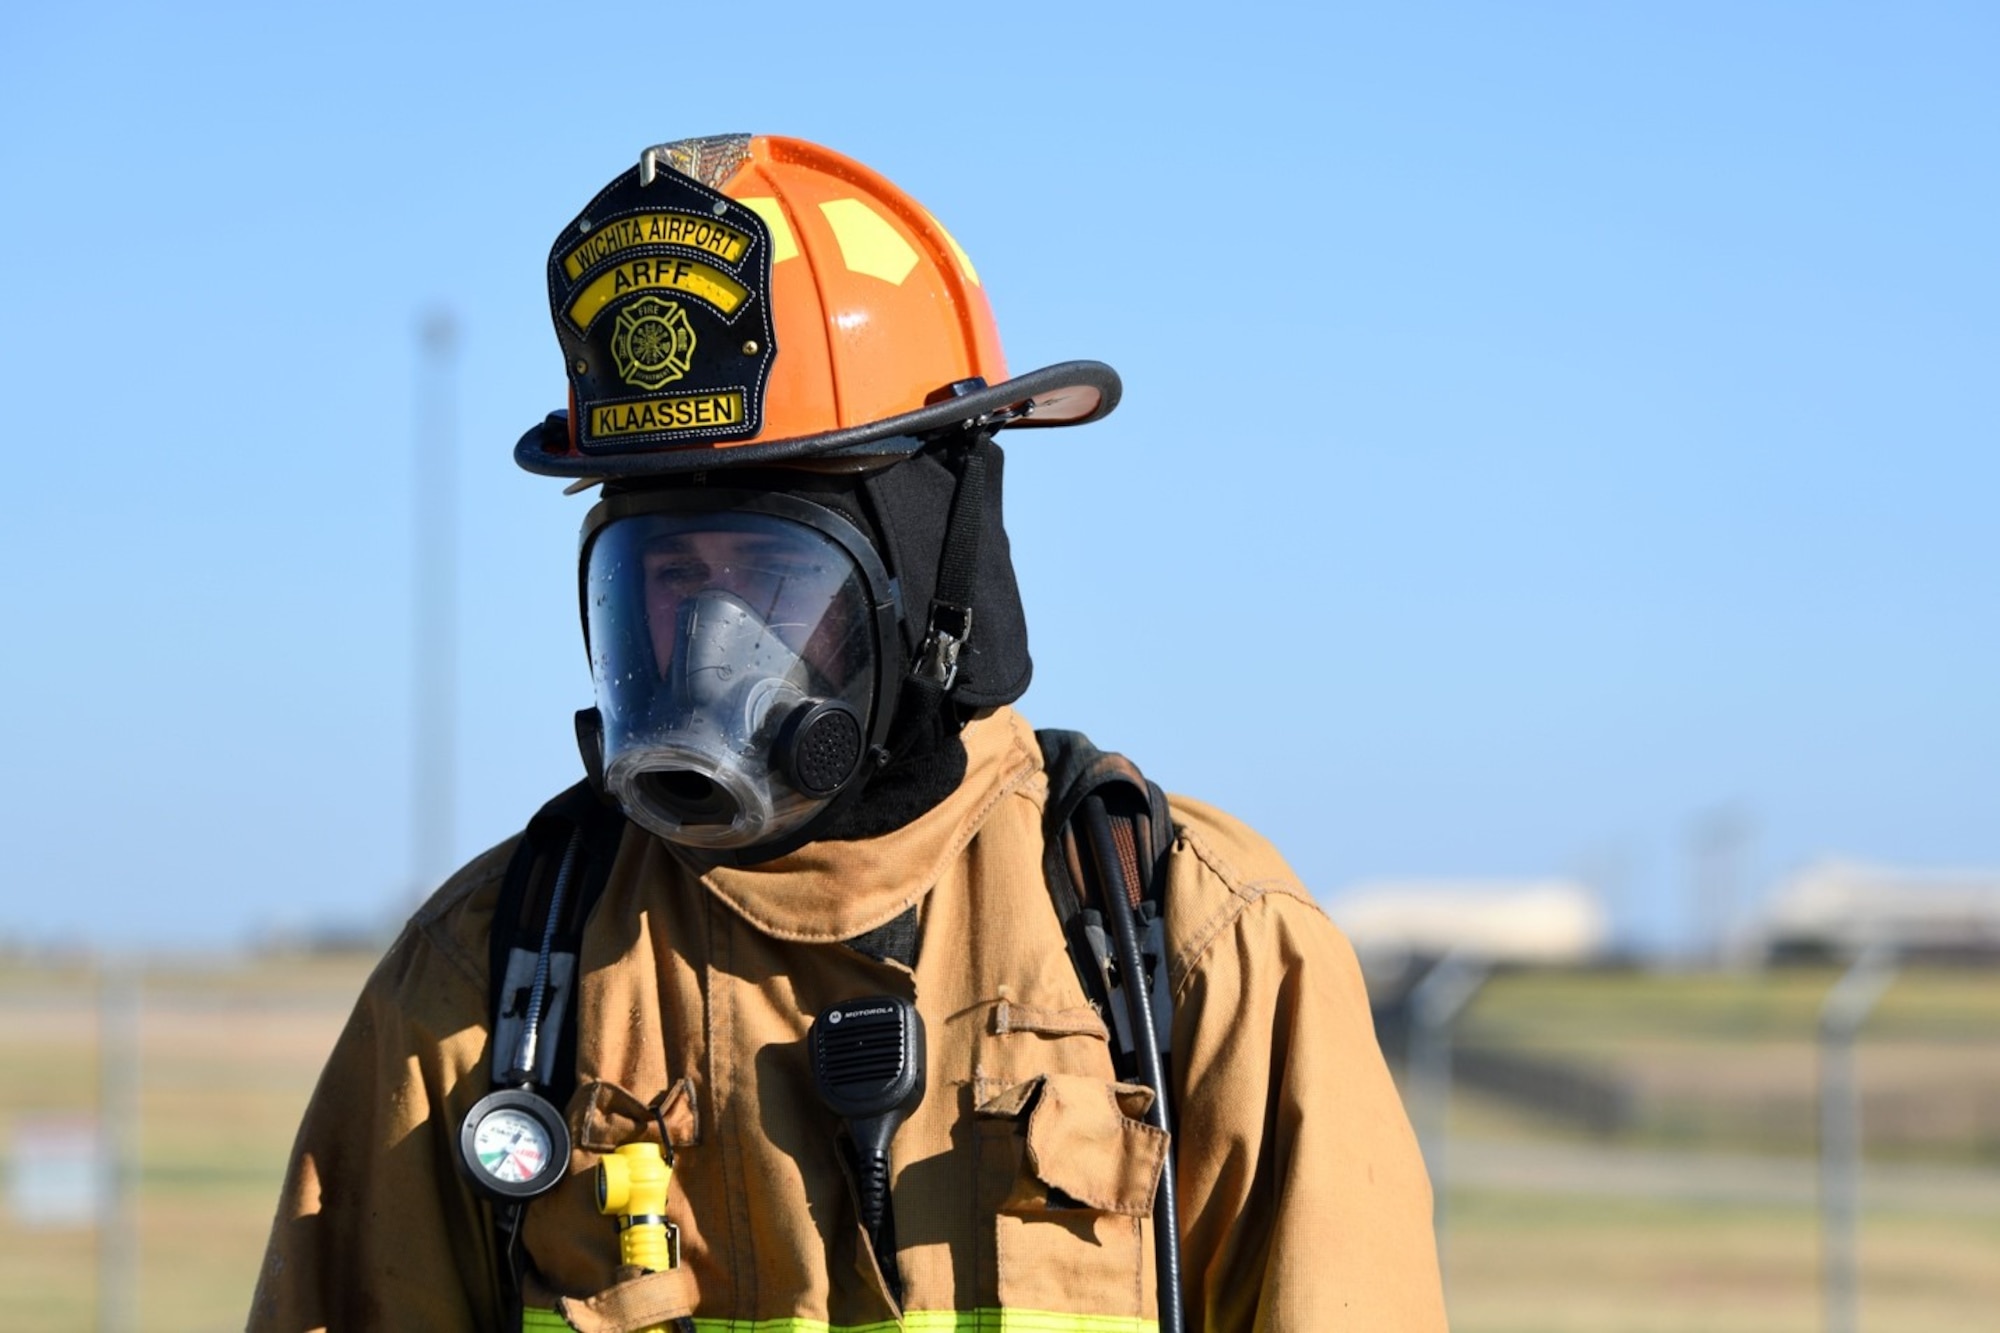 Kourt Klaassen, Wichita Airport Police and Fire Department B-shift Captain, stands in thought after his team completes recertification training Oct. 21, 2019, at McConnell Air Force Base, Kan. This was the first time in three years that the department has trained at McConnell. (U.S. Air Force photo by Airman 1st Class Nilsa E. Garcia)